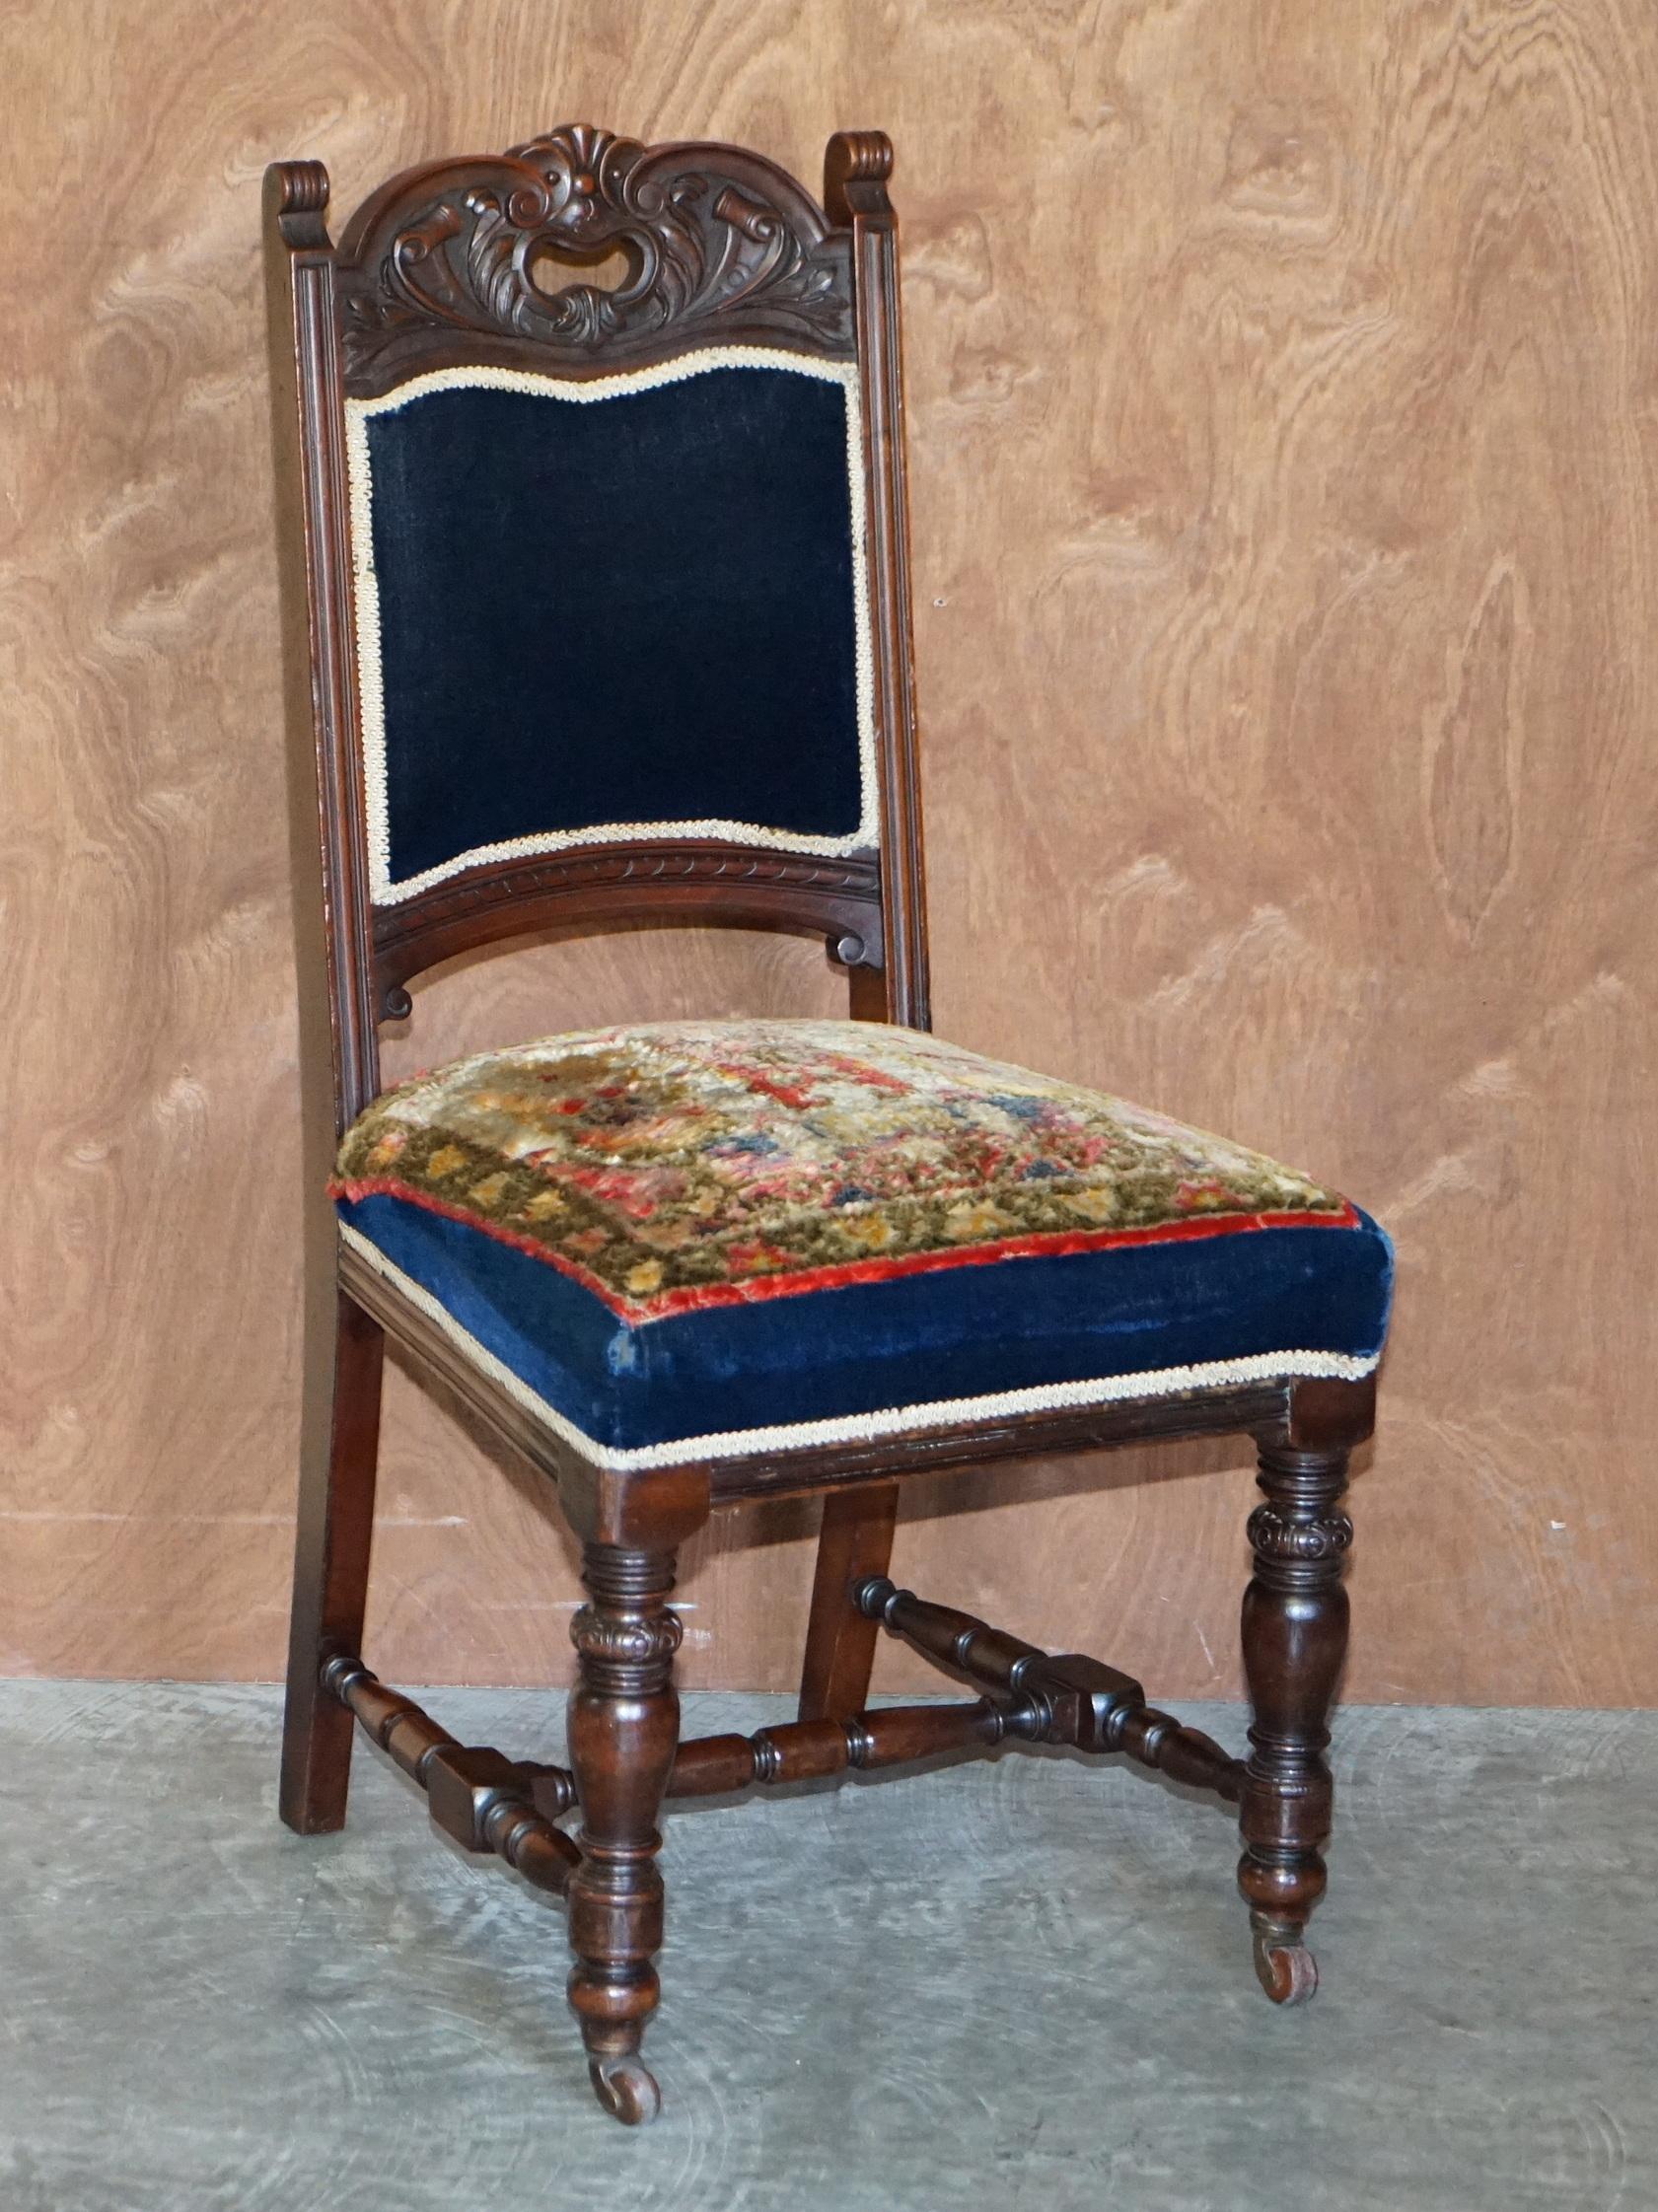 We are delighted to offer for sale this very rare and highly collectable set of six original Victorian mahogany framed dining chairs with Napoleonic blue bordered Turkey Kilim Rug upholstery which are part of a suite

These have a very rare